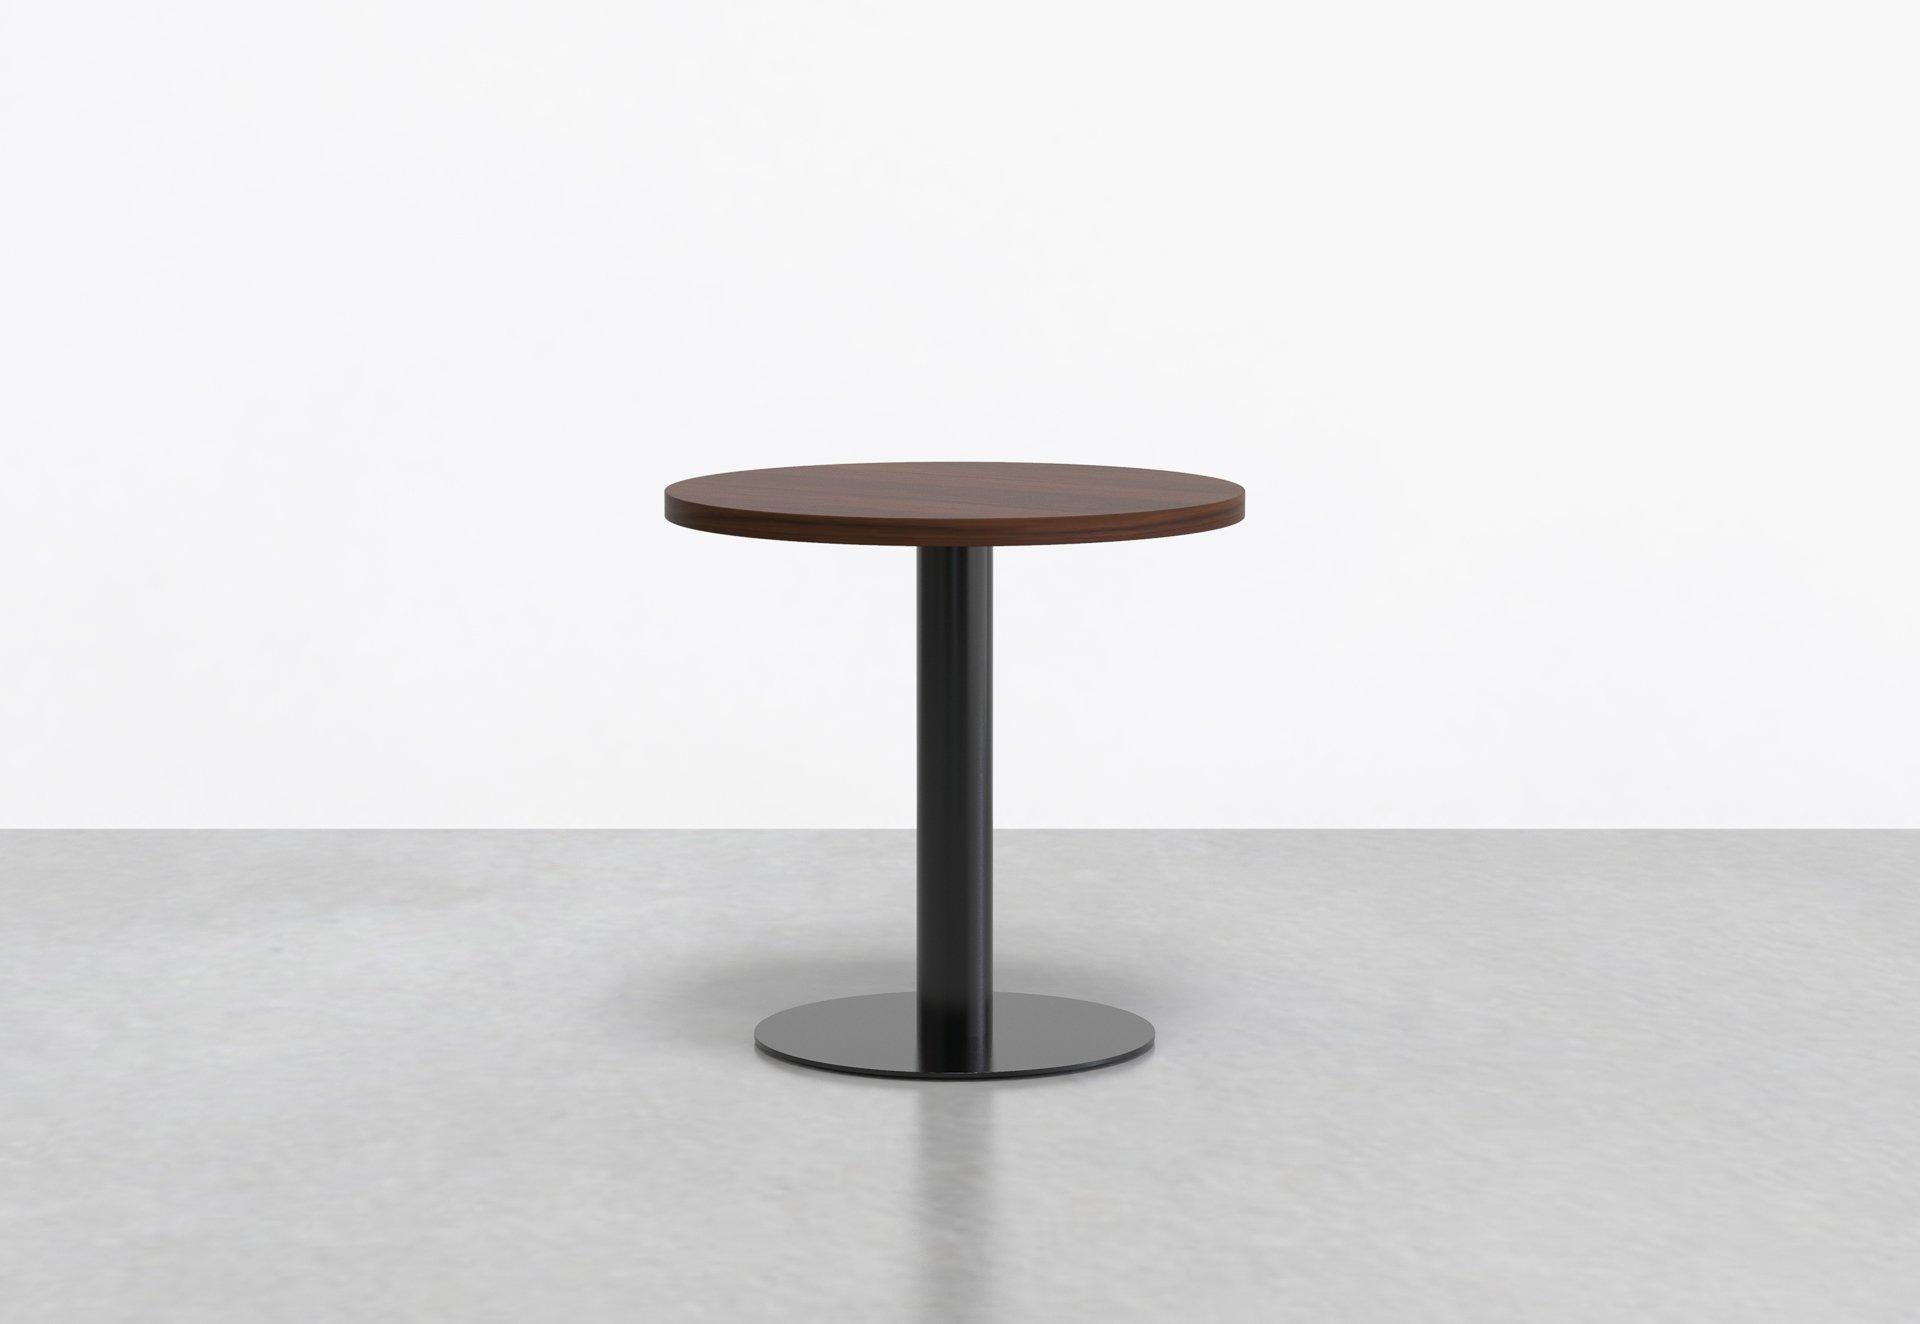 The cafe version of our larger Mast tables, the Mast cafe is a modern cafe table designed for dining and common areas. Choose between round or square tops, paired with a cylindrical pedestal base, which tucks into smaller areas with ease.